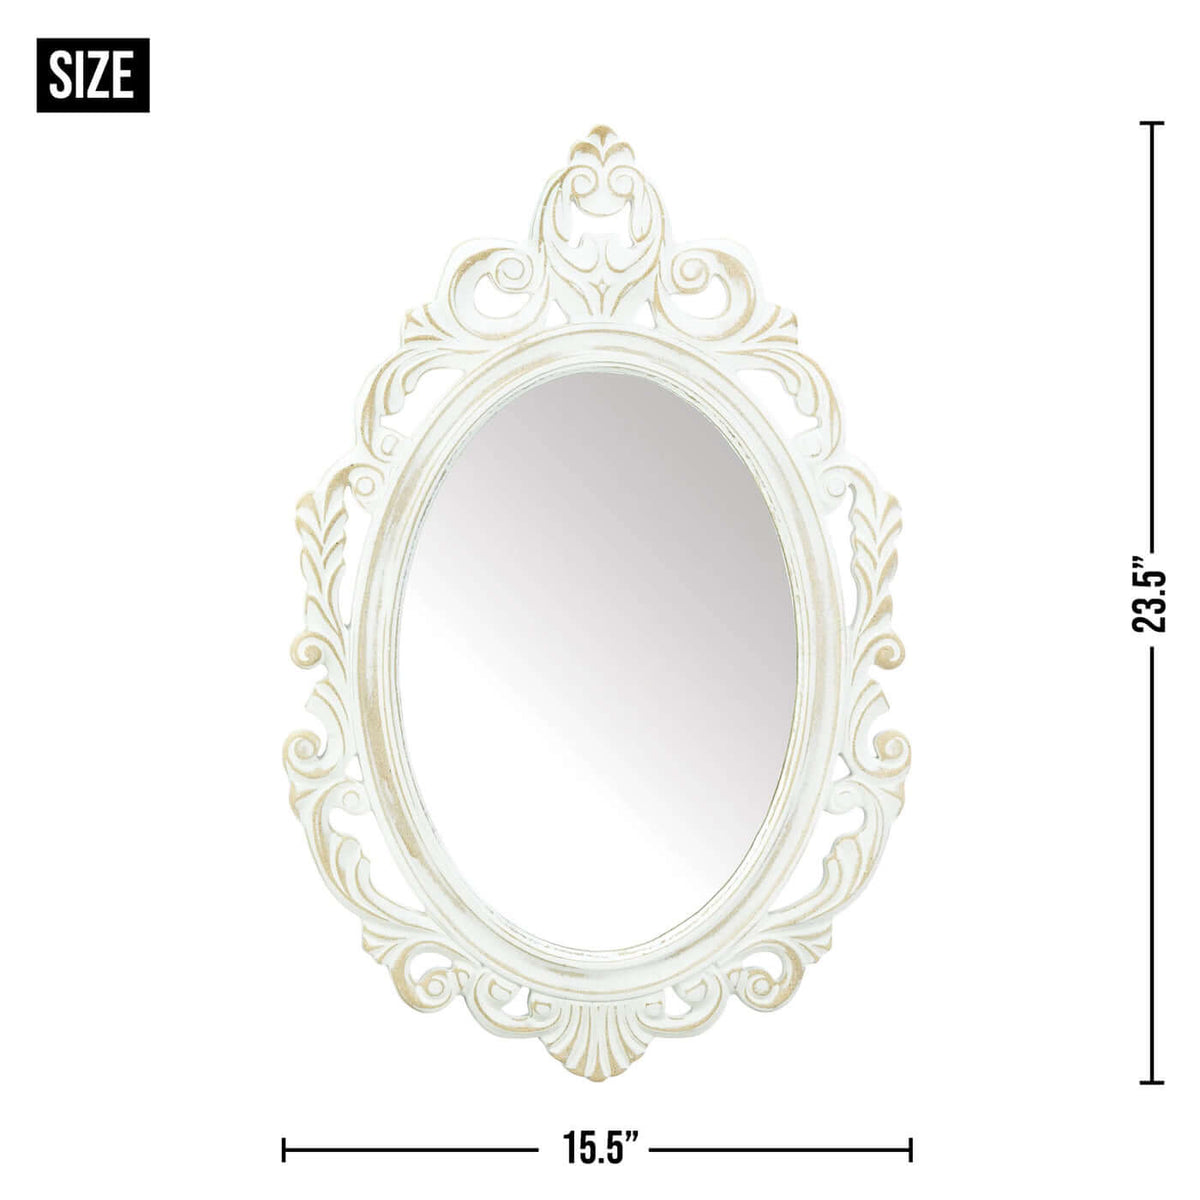 Antiqued White Wall Mirror - The House of Awareness